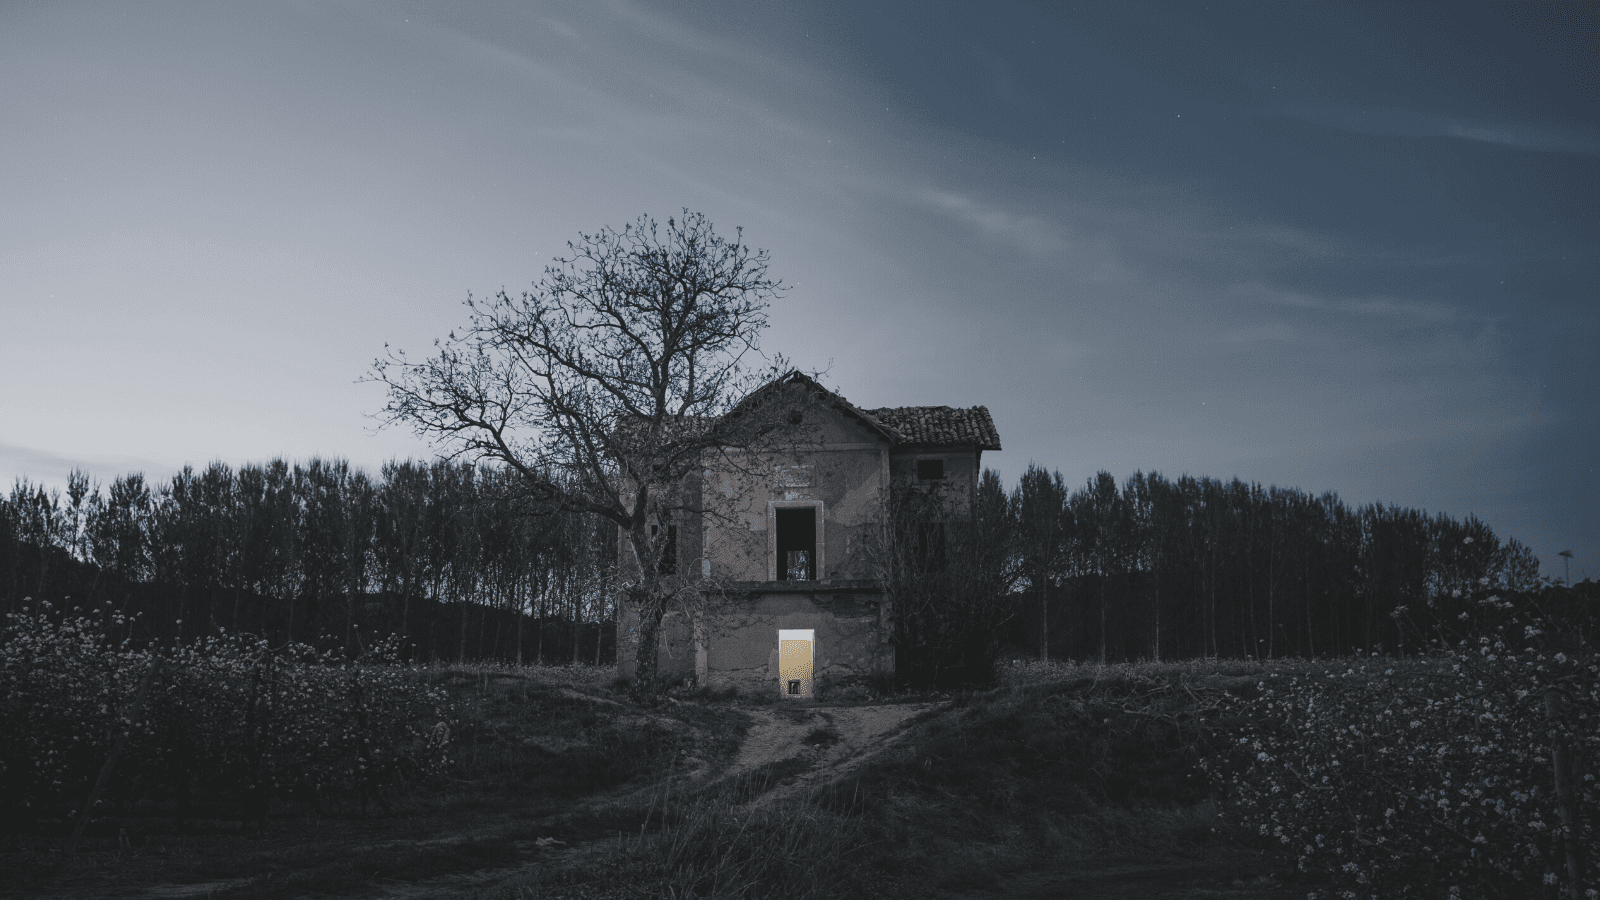 Spooky looking house in field with trees